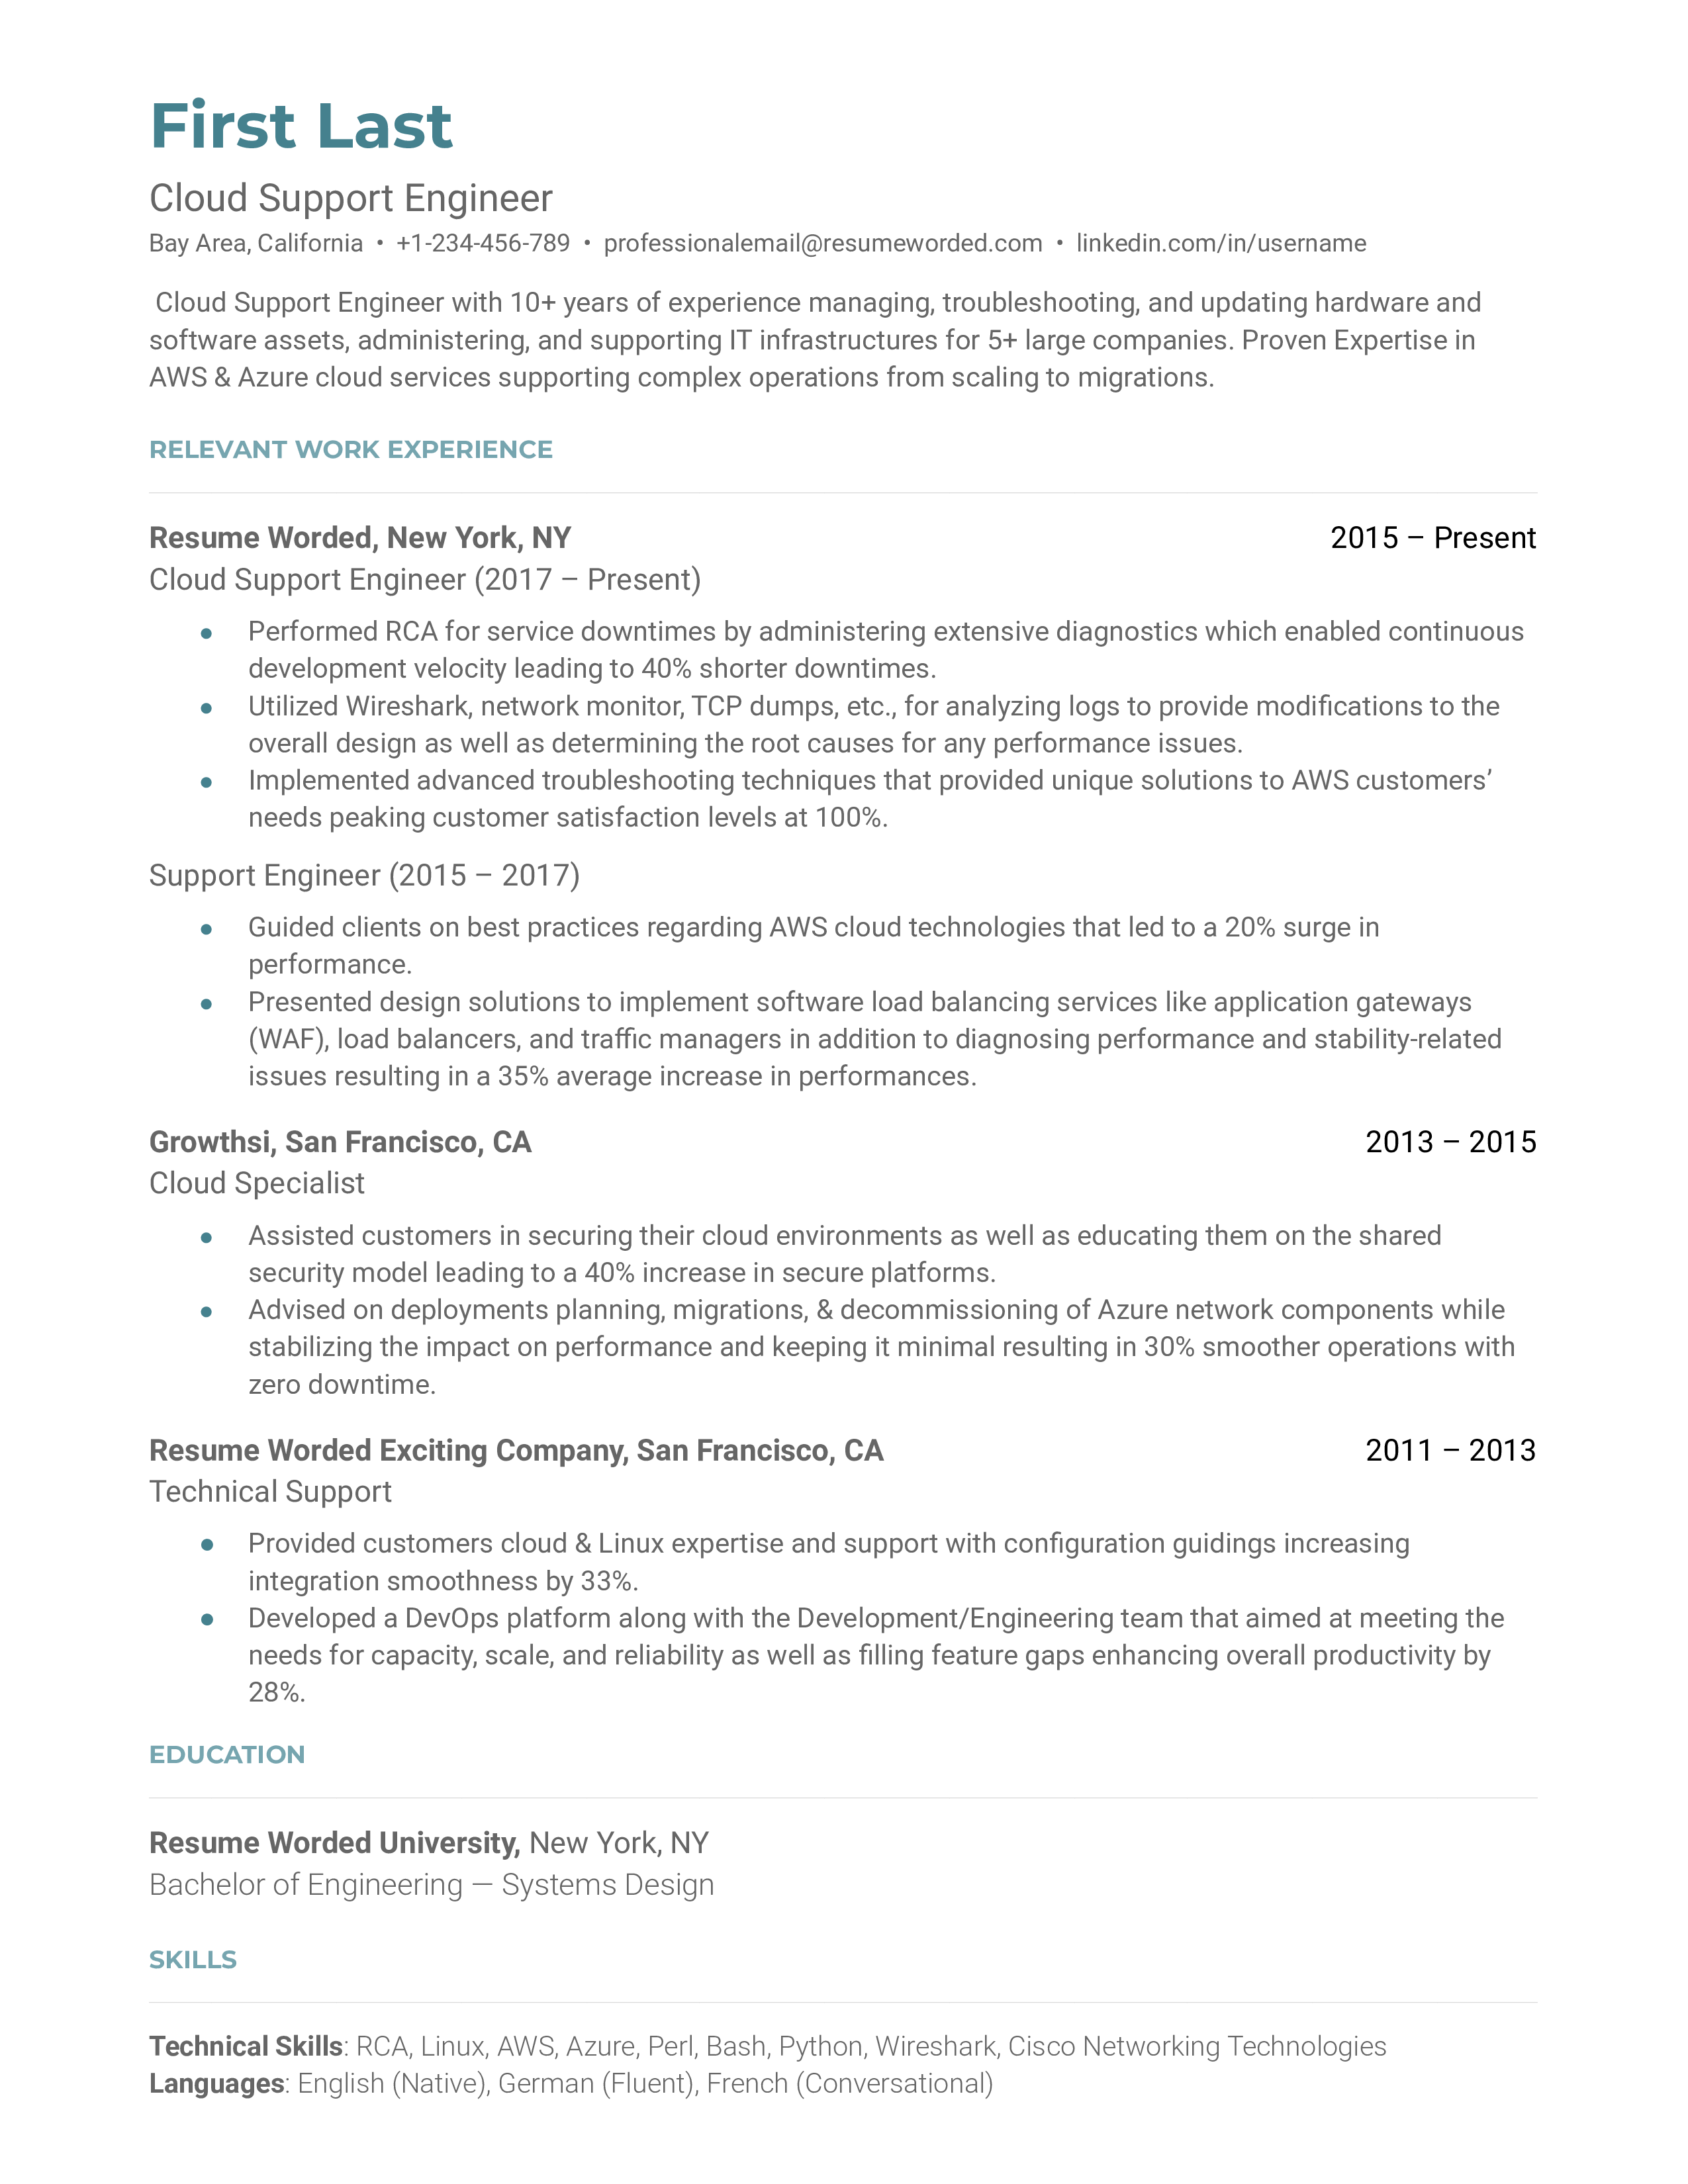 Cloud Support Engineer resume template